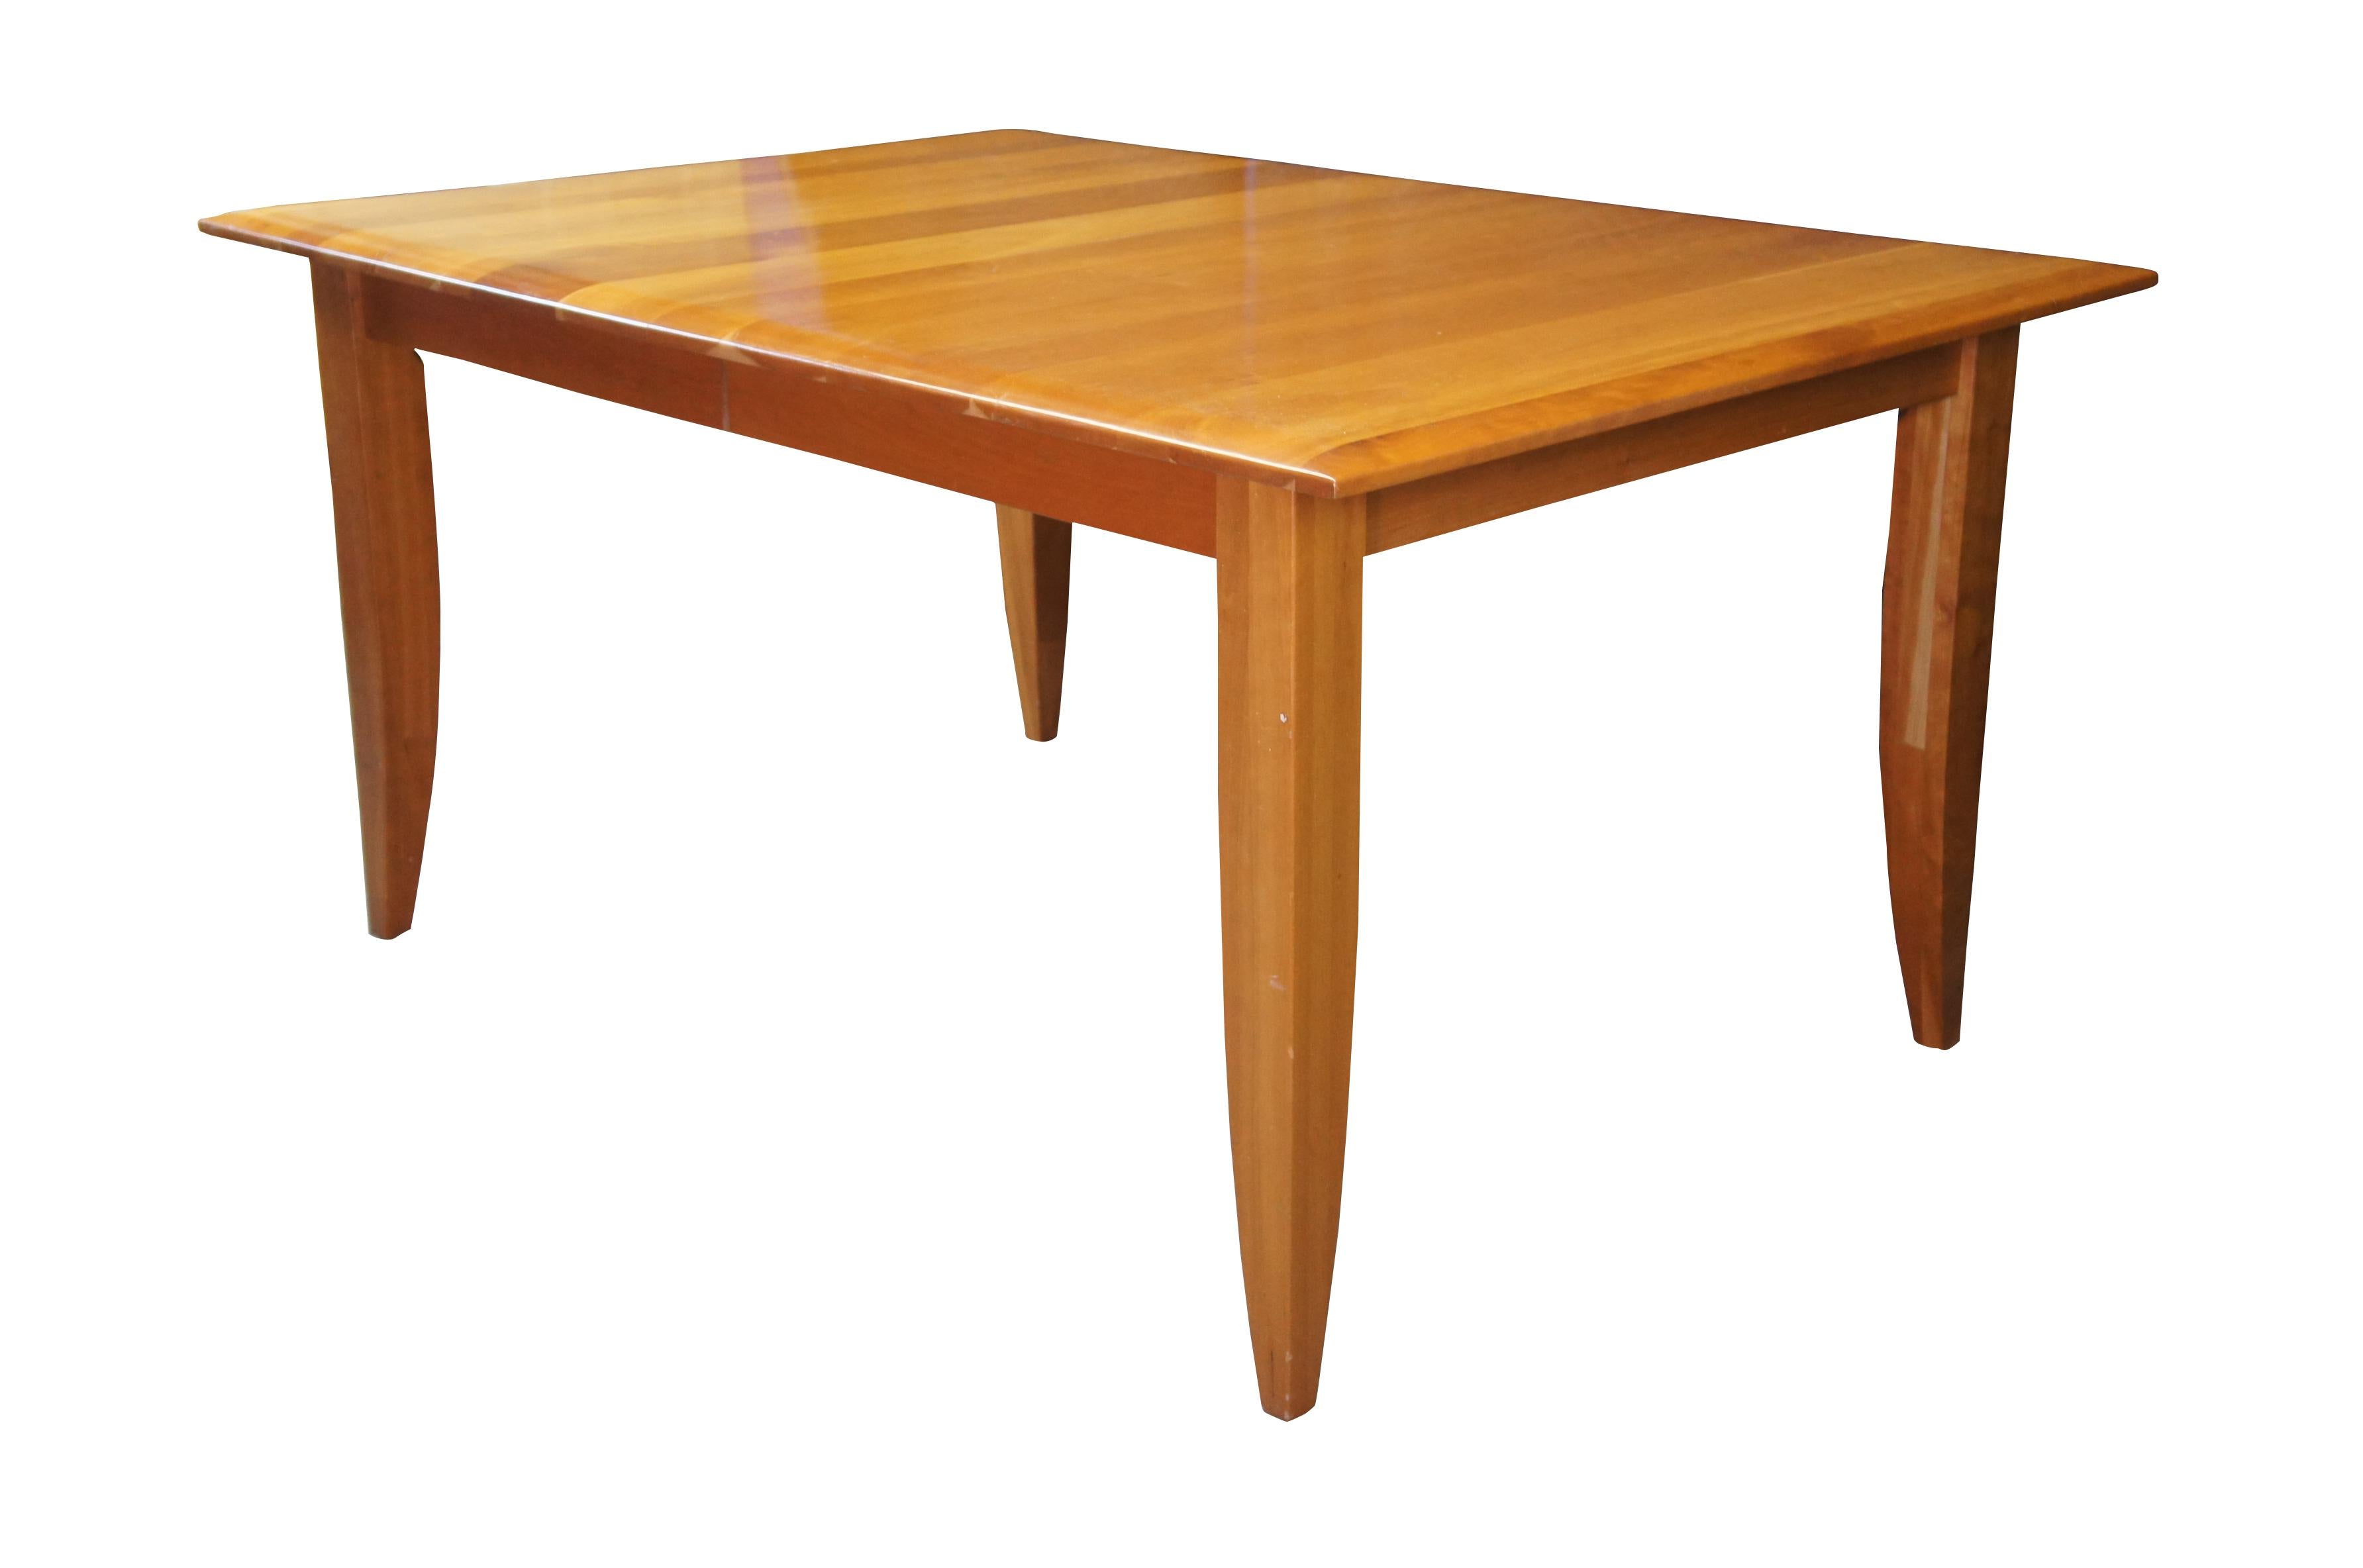 A lovely Arhaus Italian Cherry farmhouse Shaker or Amish style dining table. Features a large rectangular top with planks running perpendicular to the table top. The table is supported by square legs that taper towards the feet. Includes two leaves